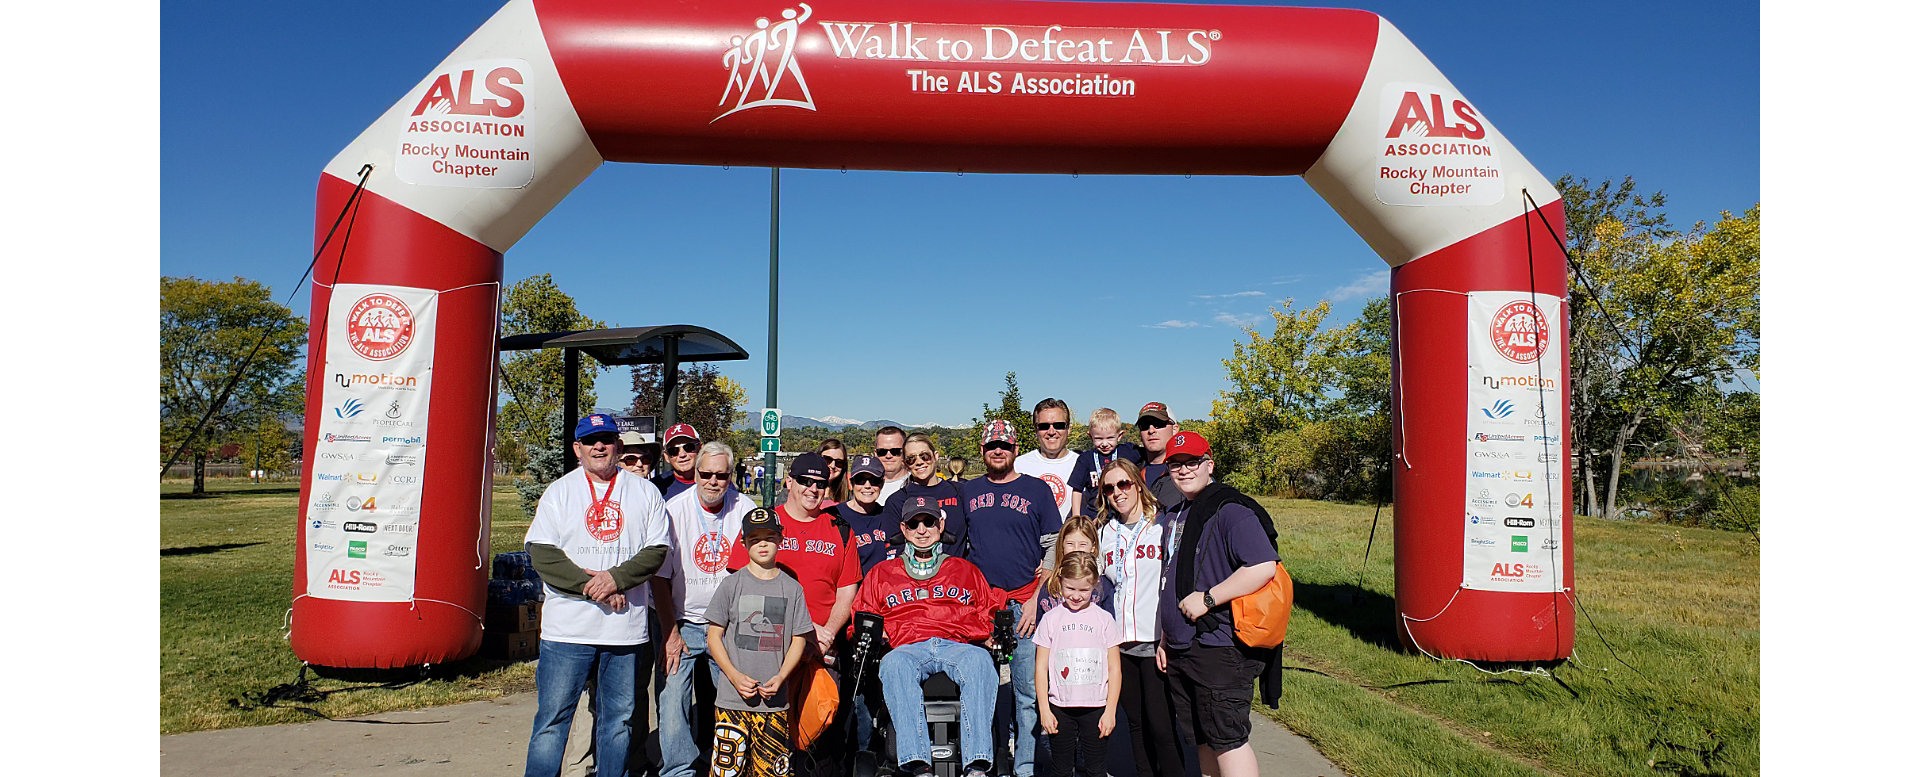 Plumbline group at the ALS walk